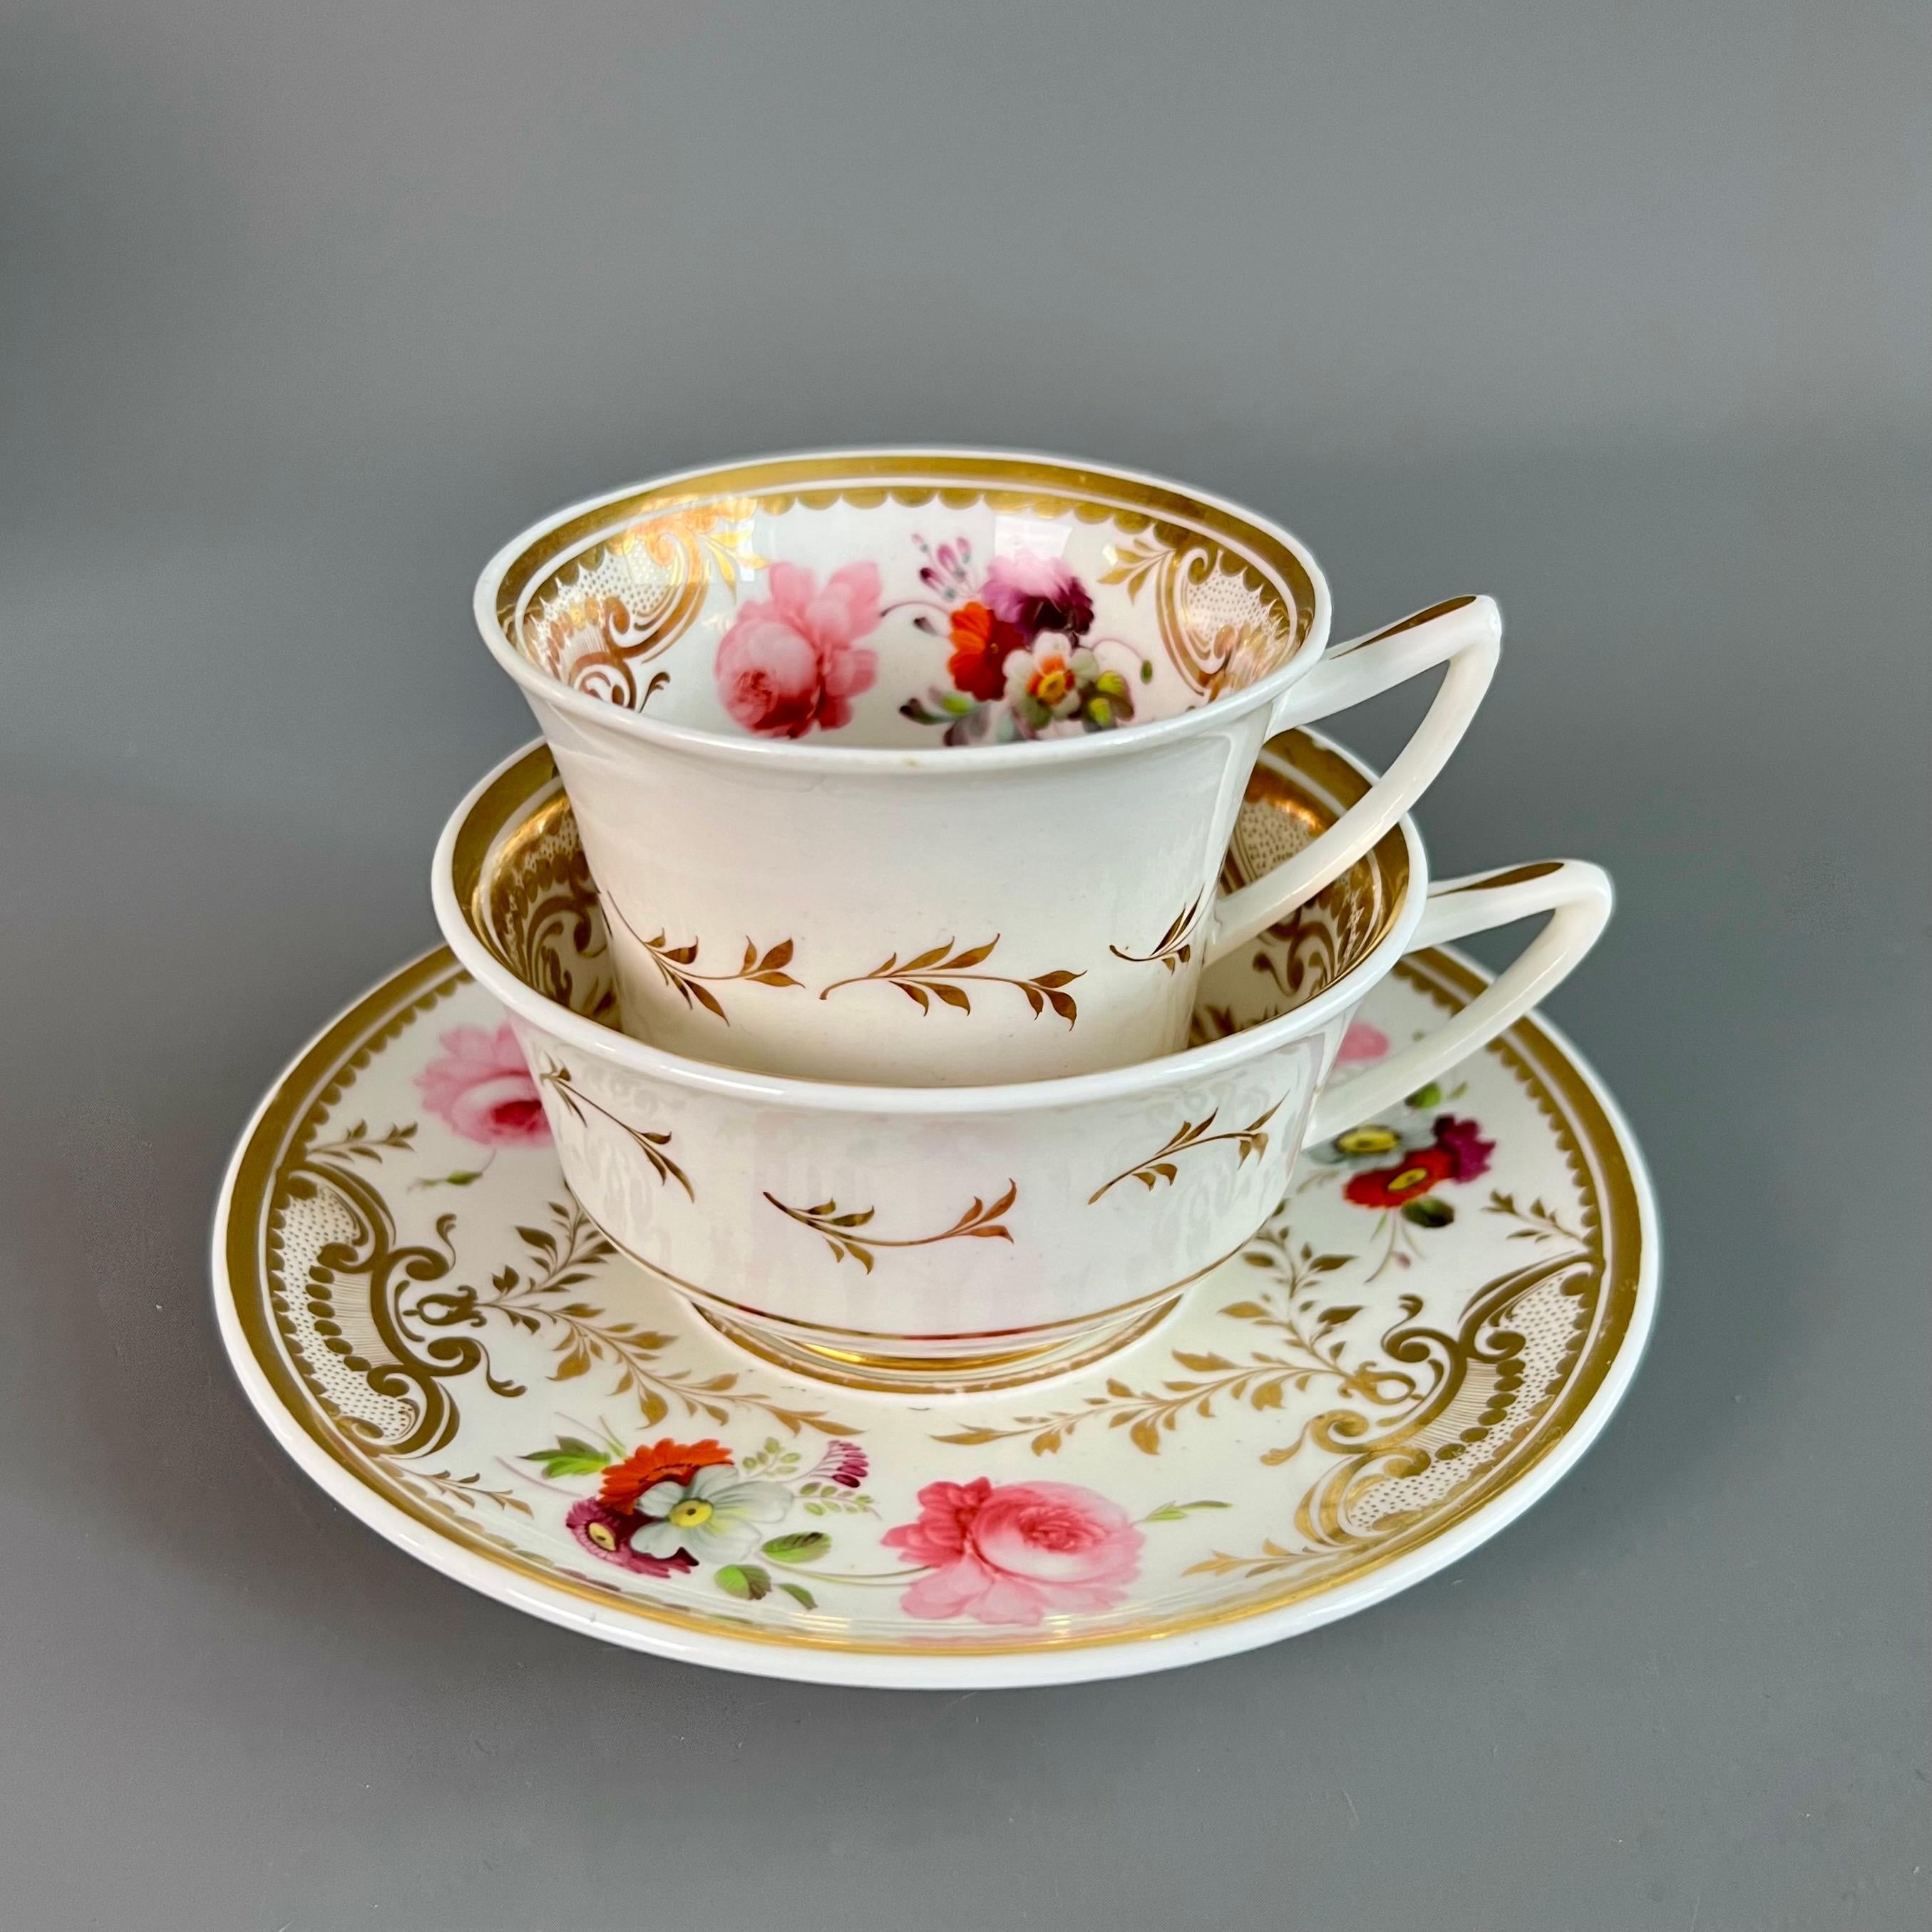 This is a rare and beautiful teacup trio made by H&R Daniel in about 1825. The set is potted in the 